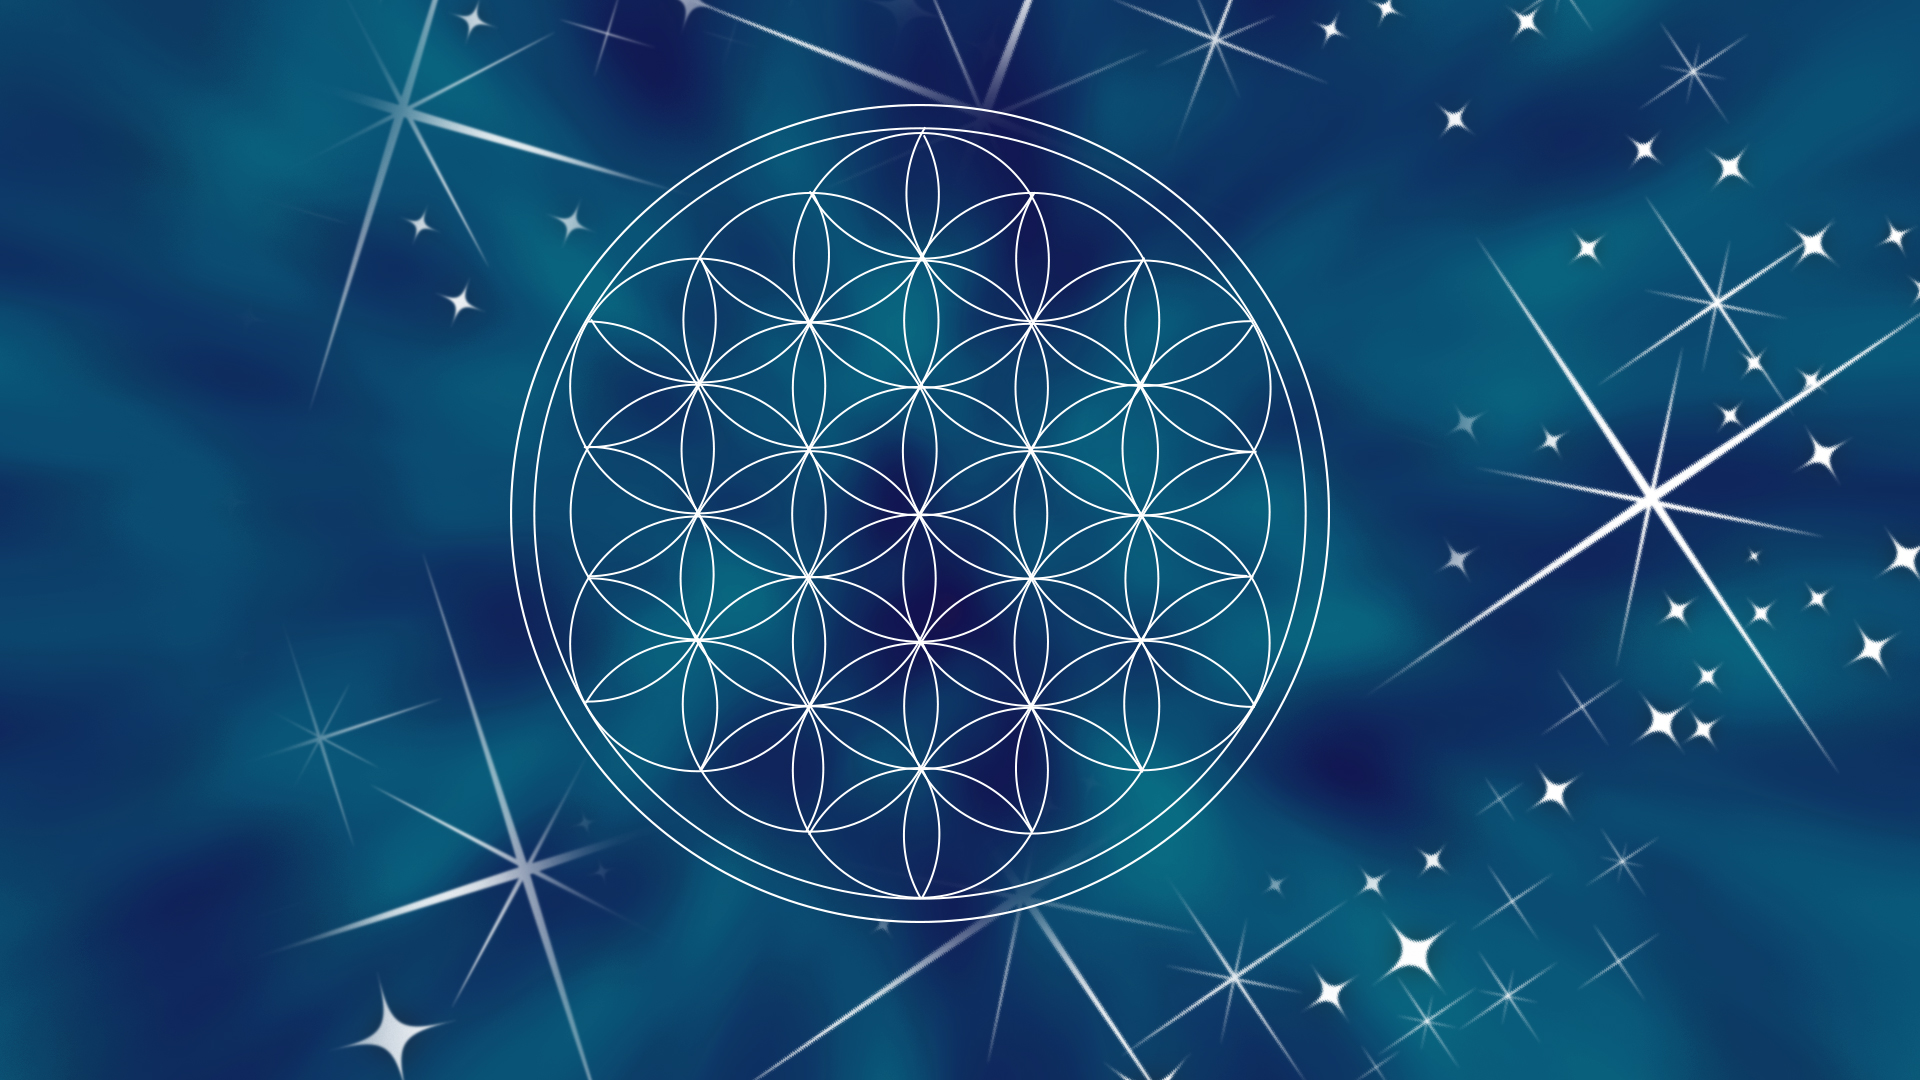 Flower of life with sparkles - Peace Wings Apparel